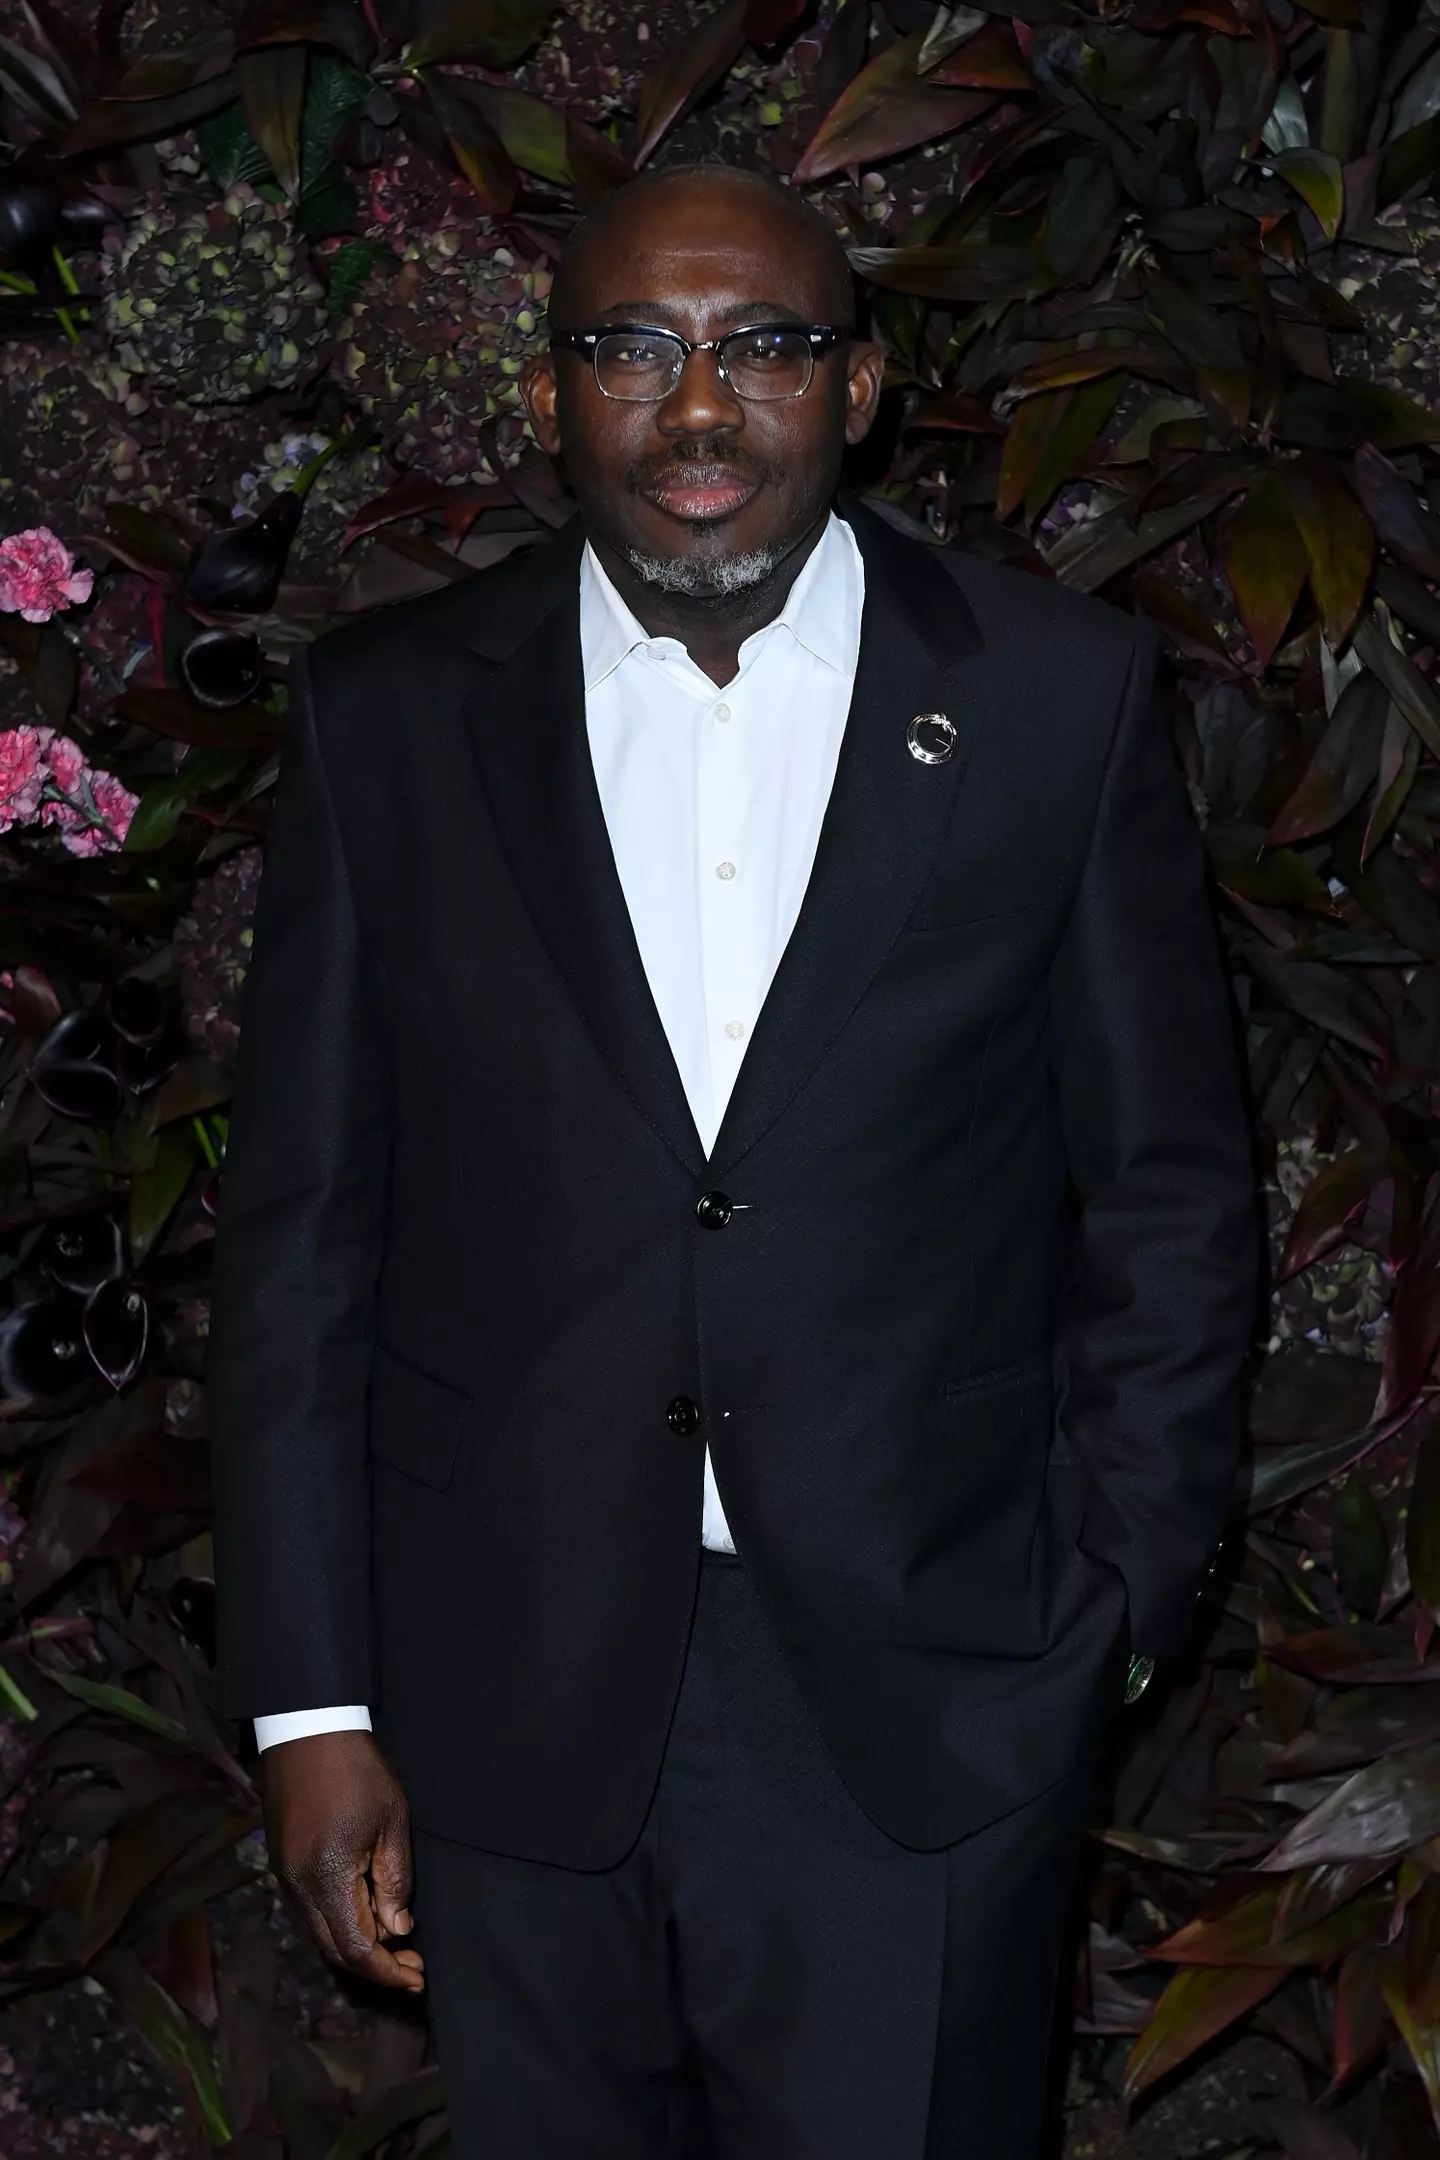 Edward Enninful is soon to step down as the Vogue editor-in-chief.